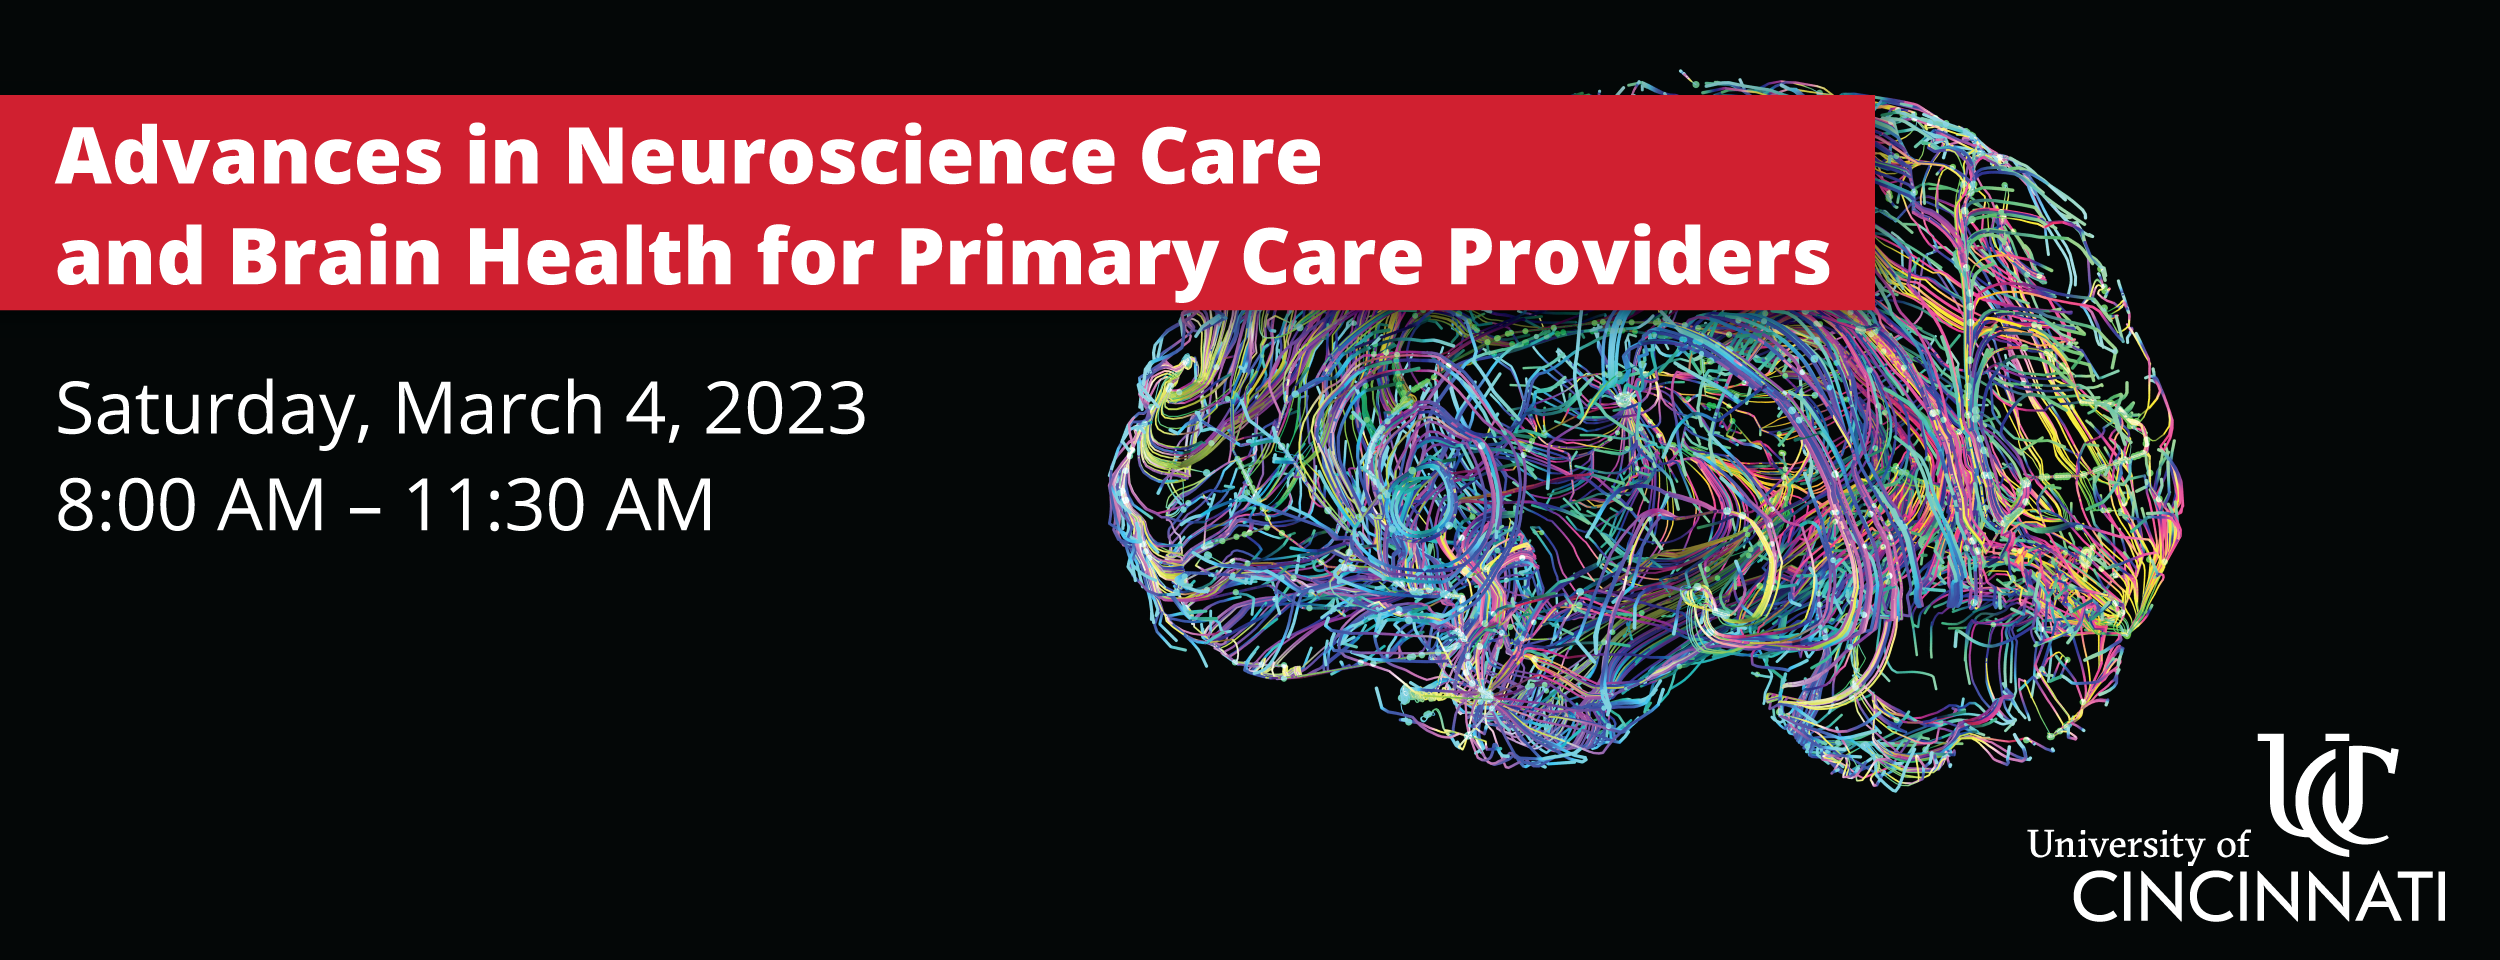 Advances in Neuroscience Care and Brain Health for Primary Care Providers Banner